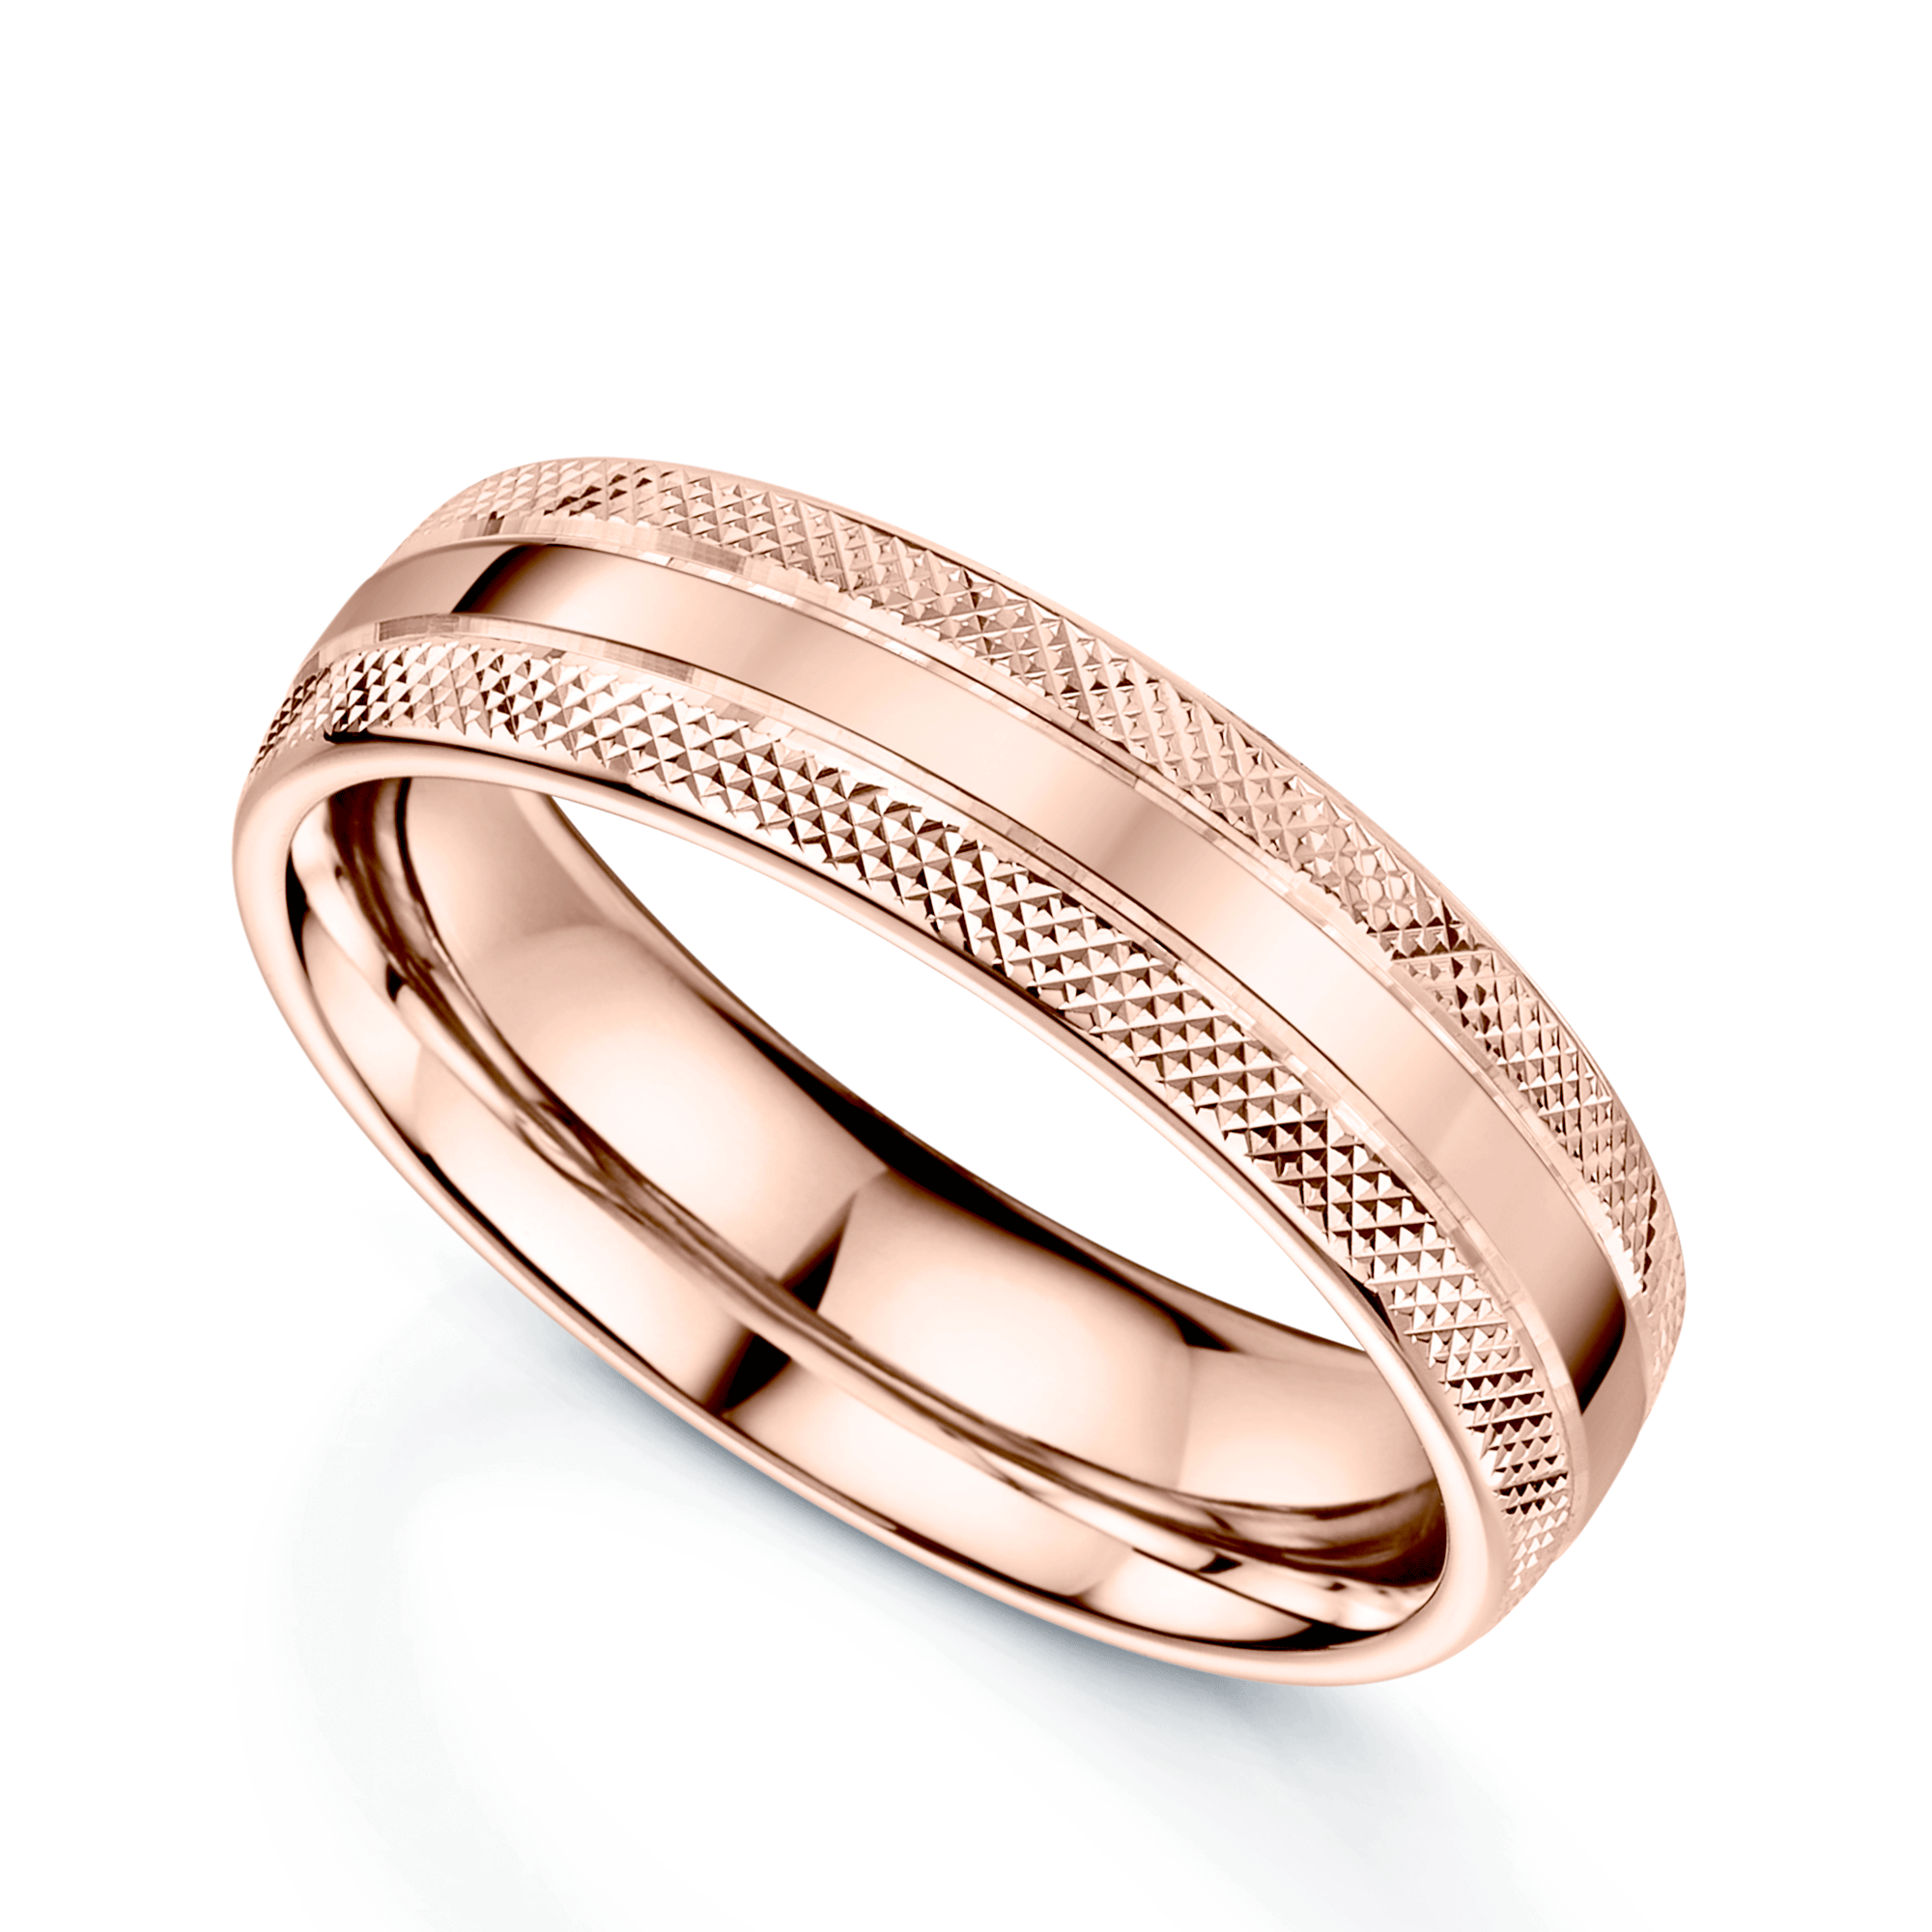 18ct Rose Gold Polished Criss-Cross Patterned Edge Court Shape Wedding Ring